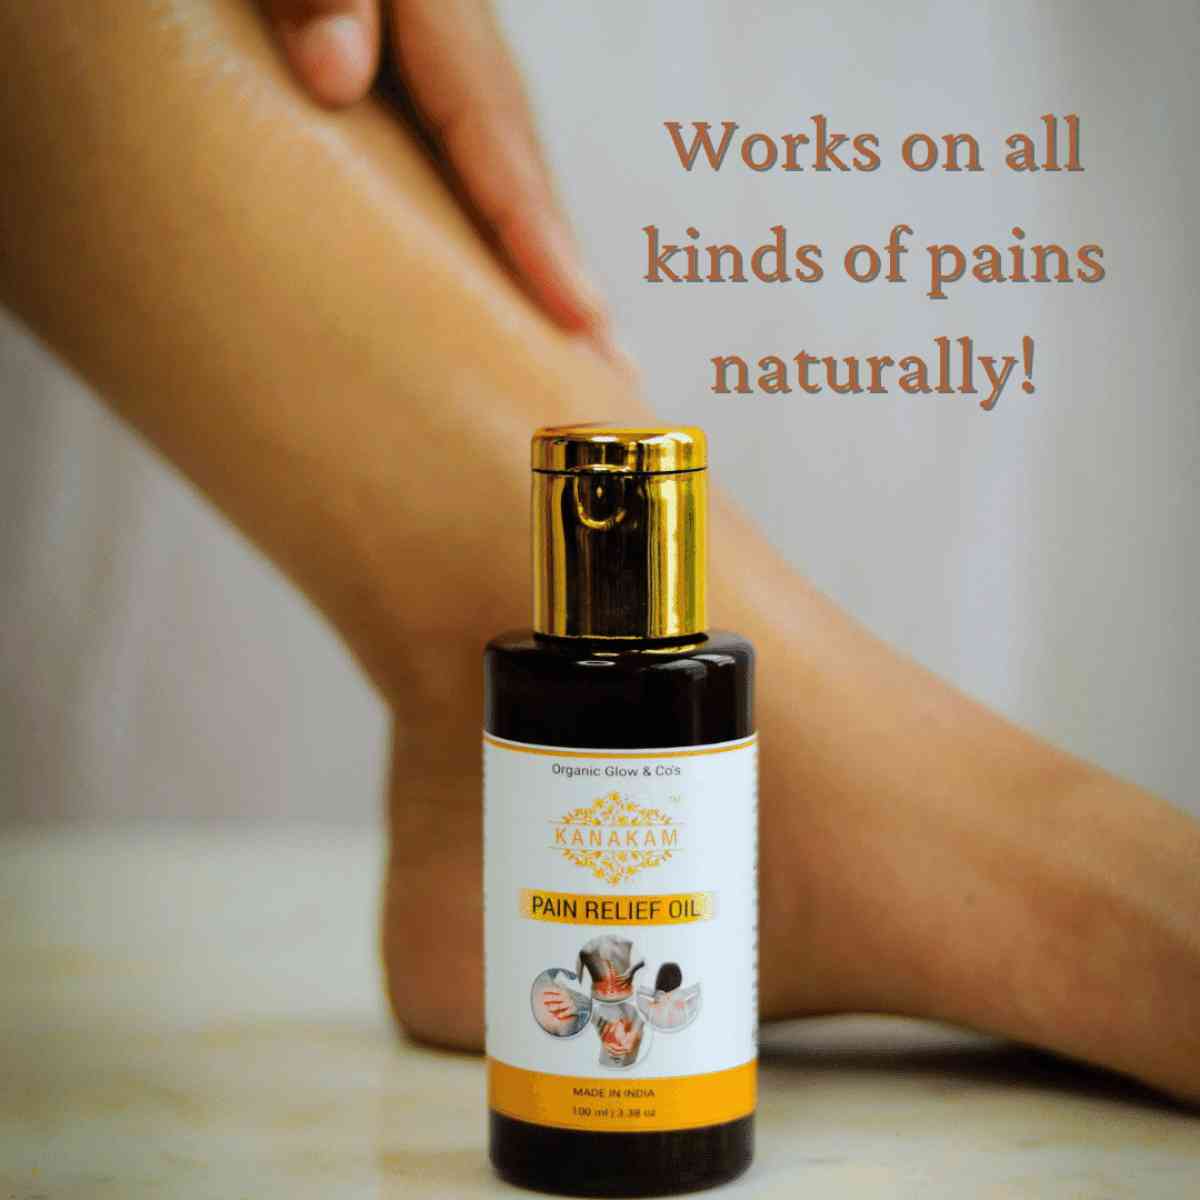 Kanakam Herbal Multipurpose Pain Relief Oil for joint and knee pain